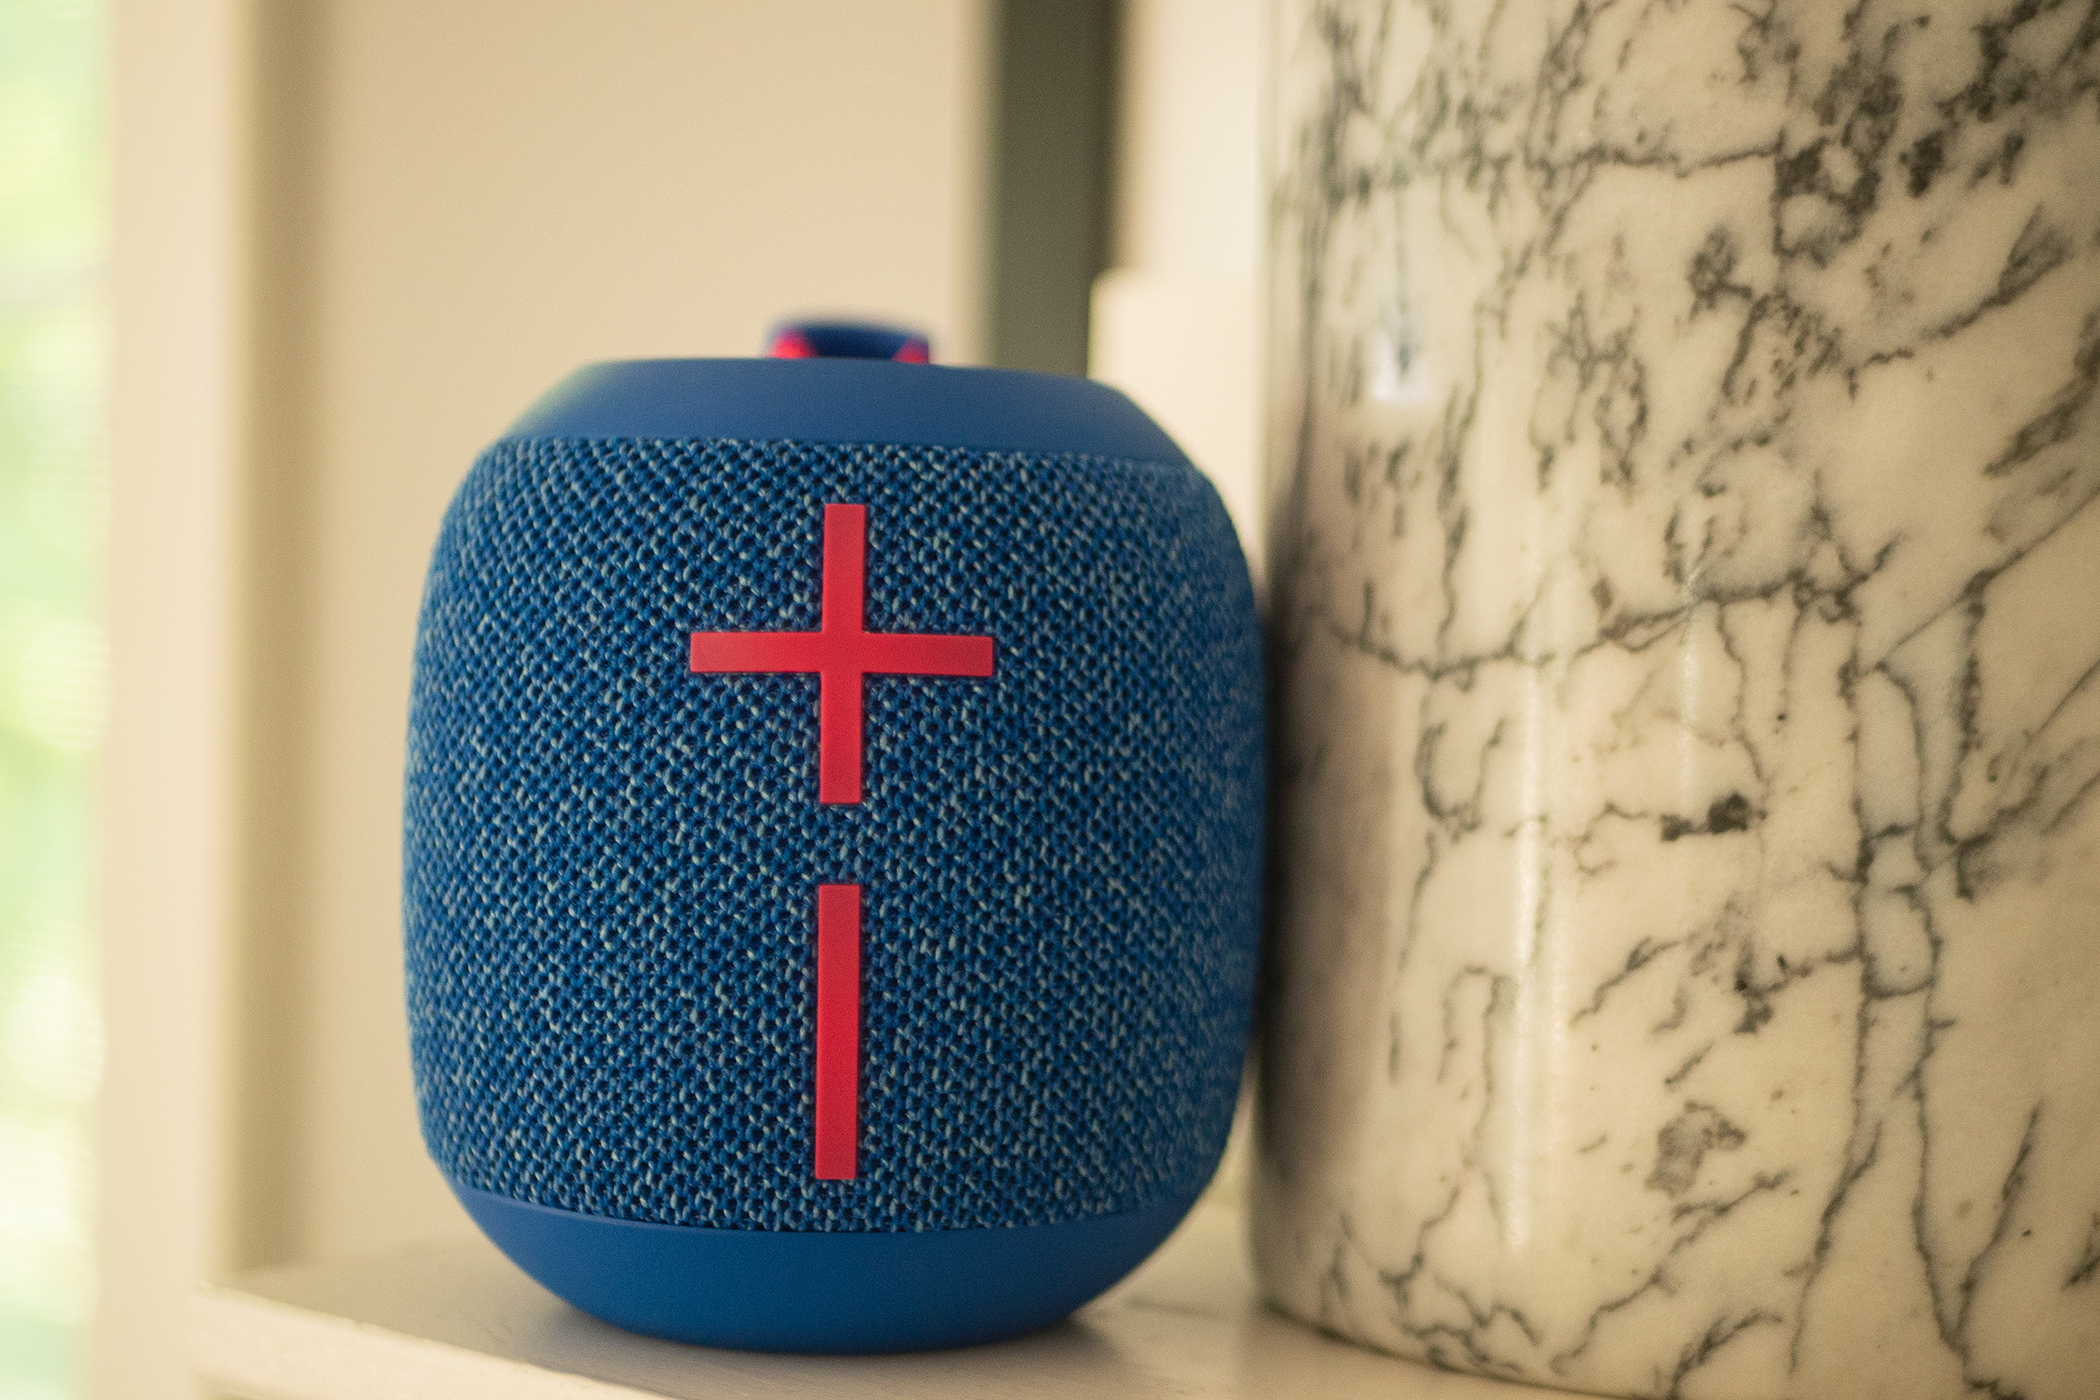 A Wonderboom 3 speaker is sitting on a mantle next to a marble-patterned container.